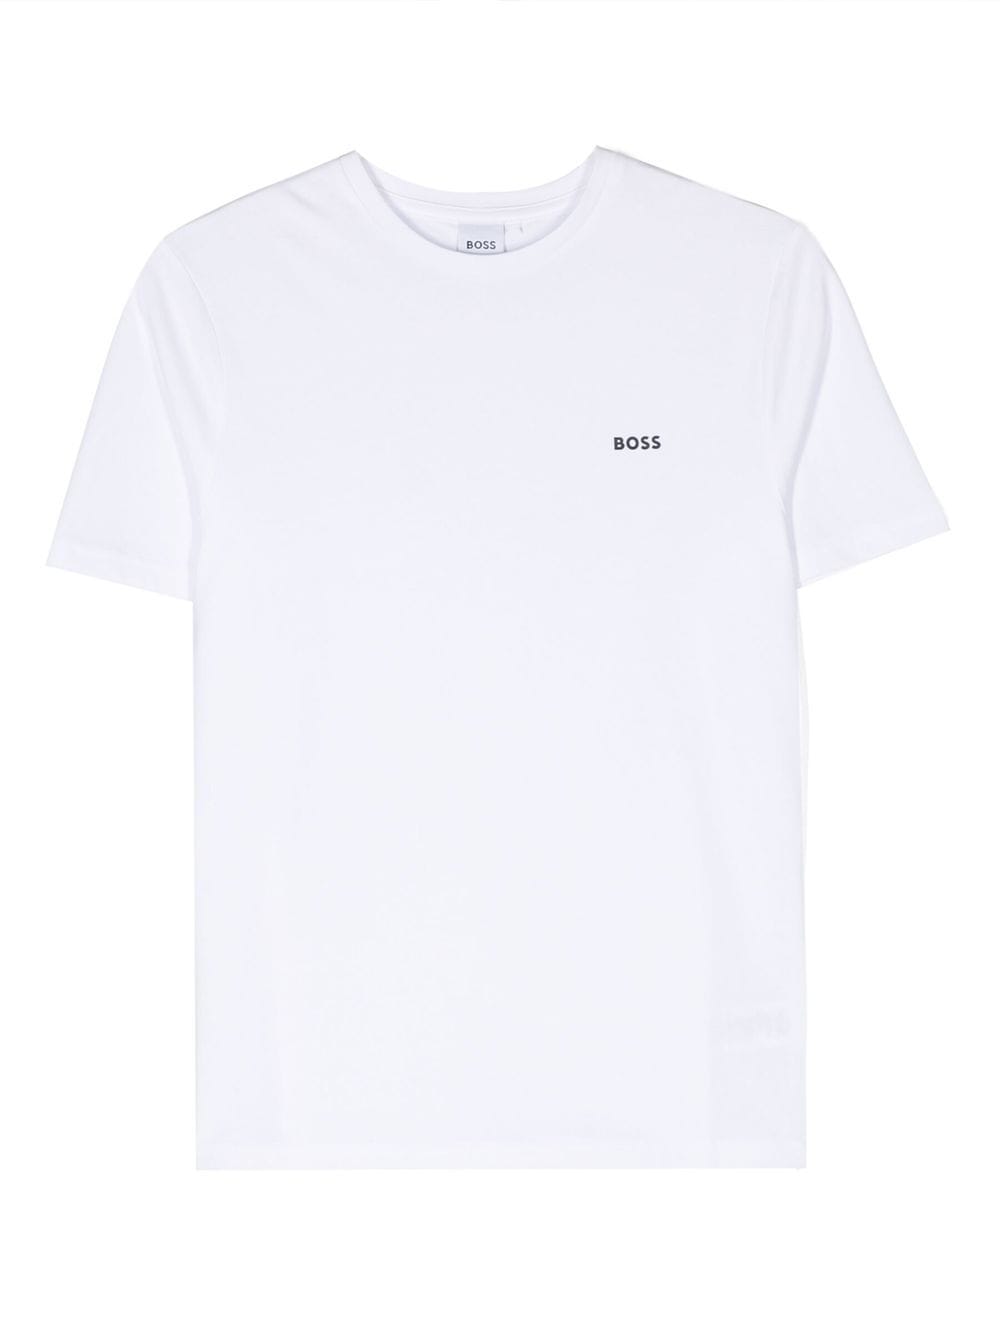 White t-shirt for boys with small logo